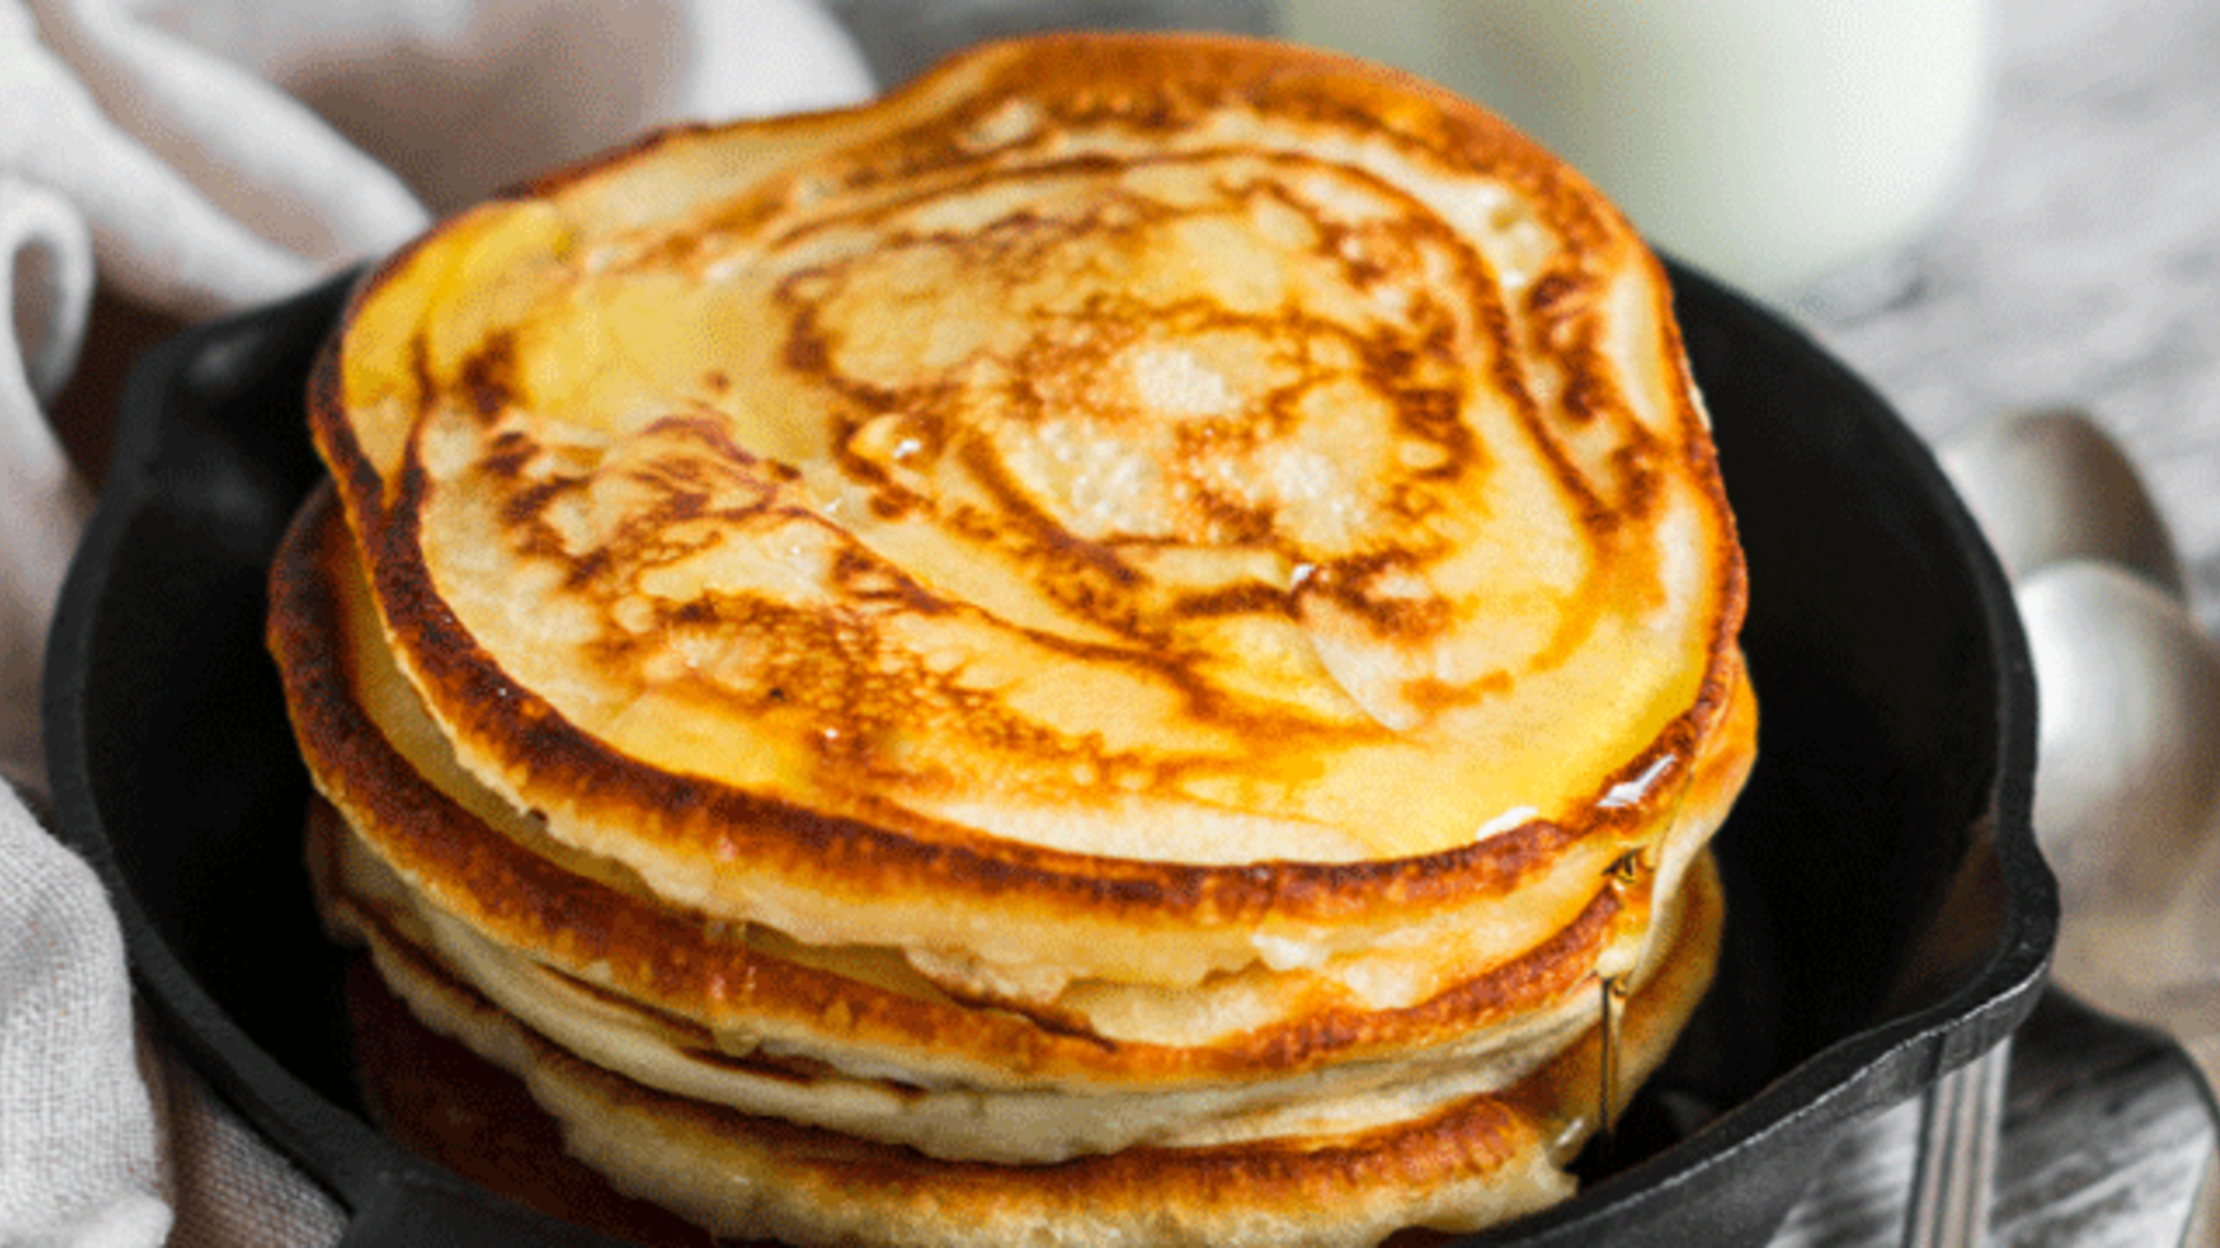 How the Perfect Pancake Recipe May Help Us Treat Glaucoma | Mental Floss